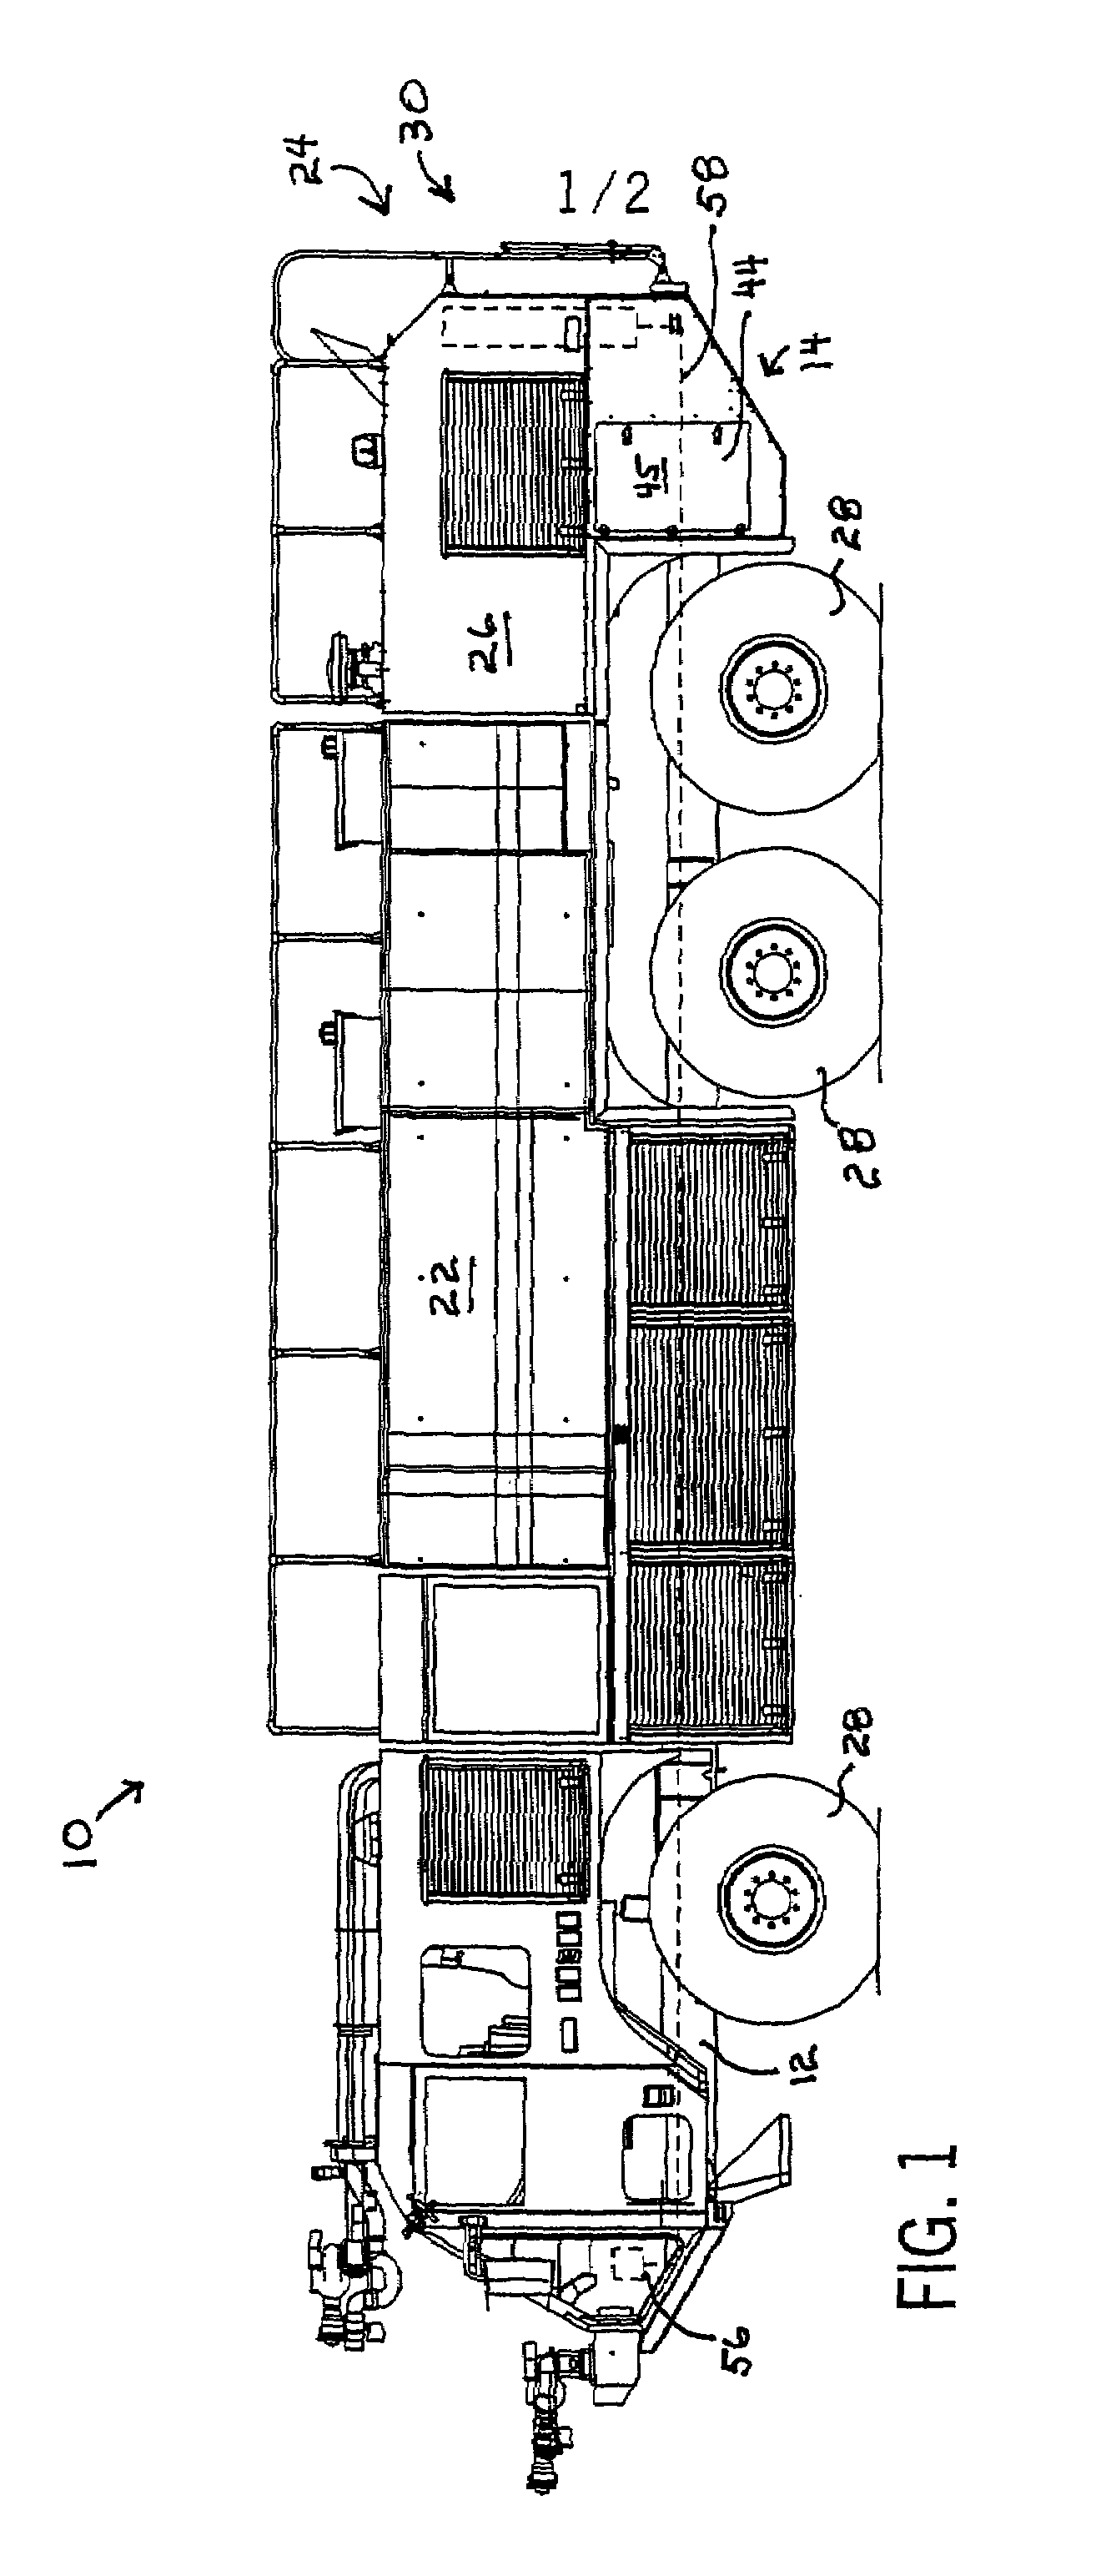 Apparatus and method to facilitate maintenance of a work vehicle